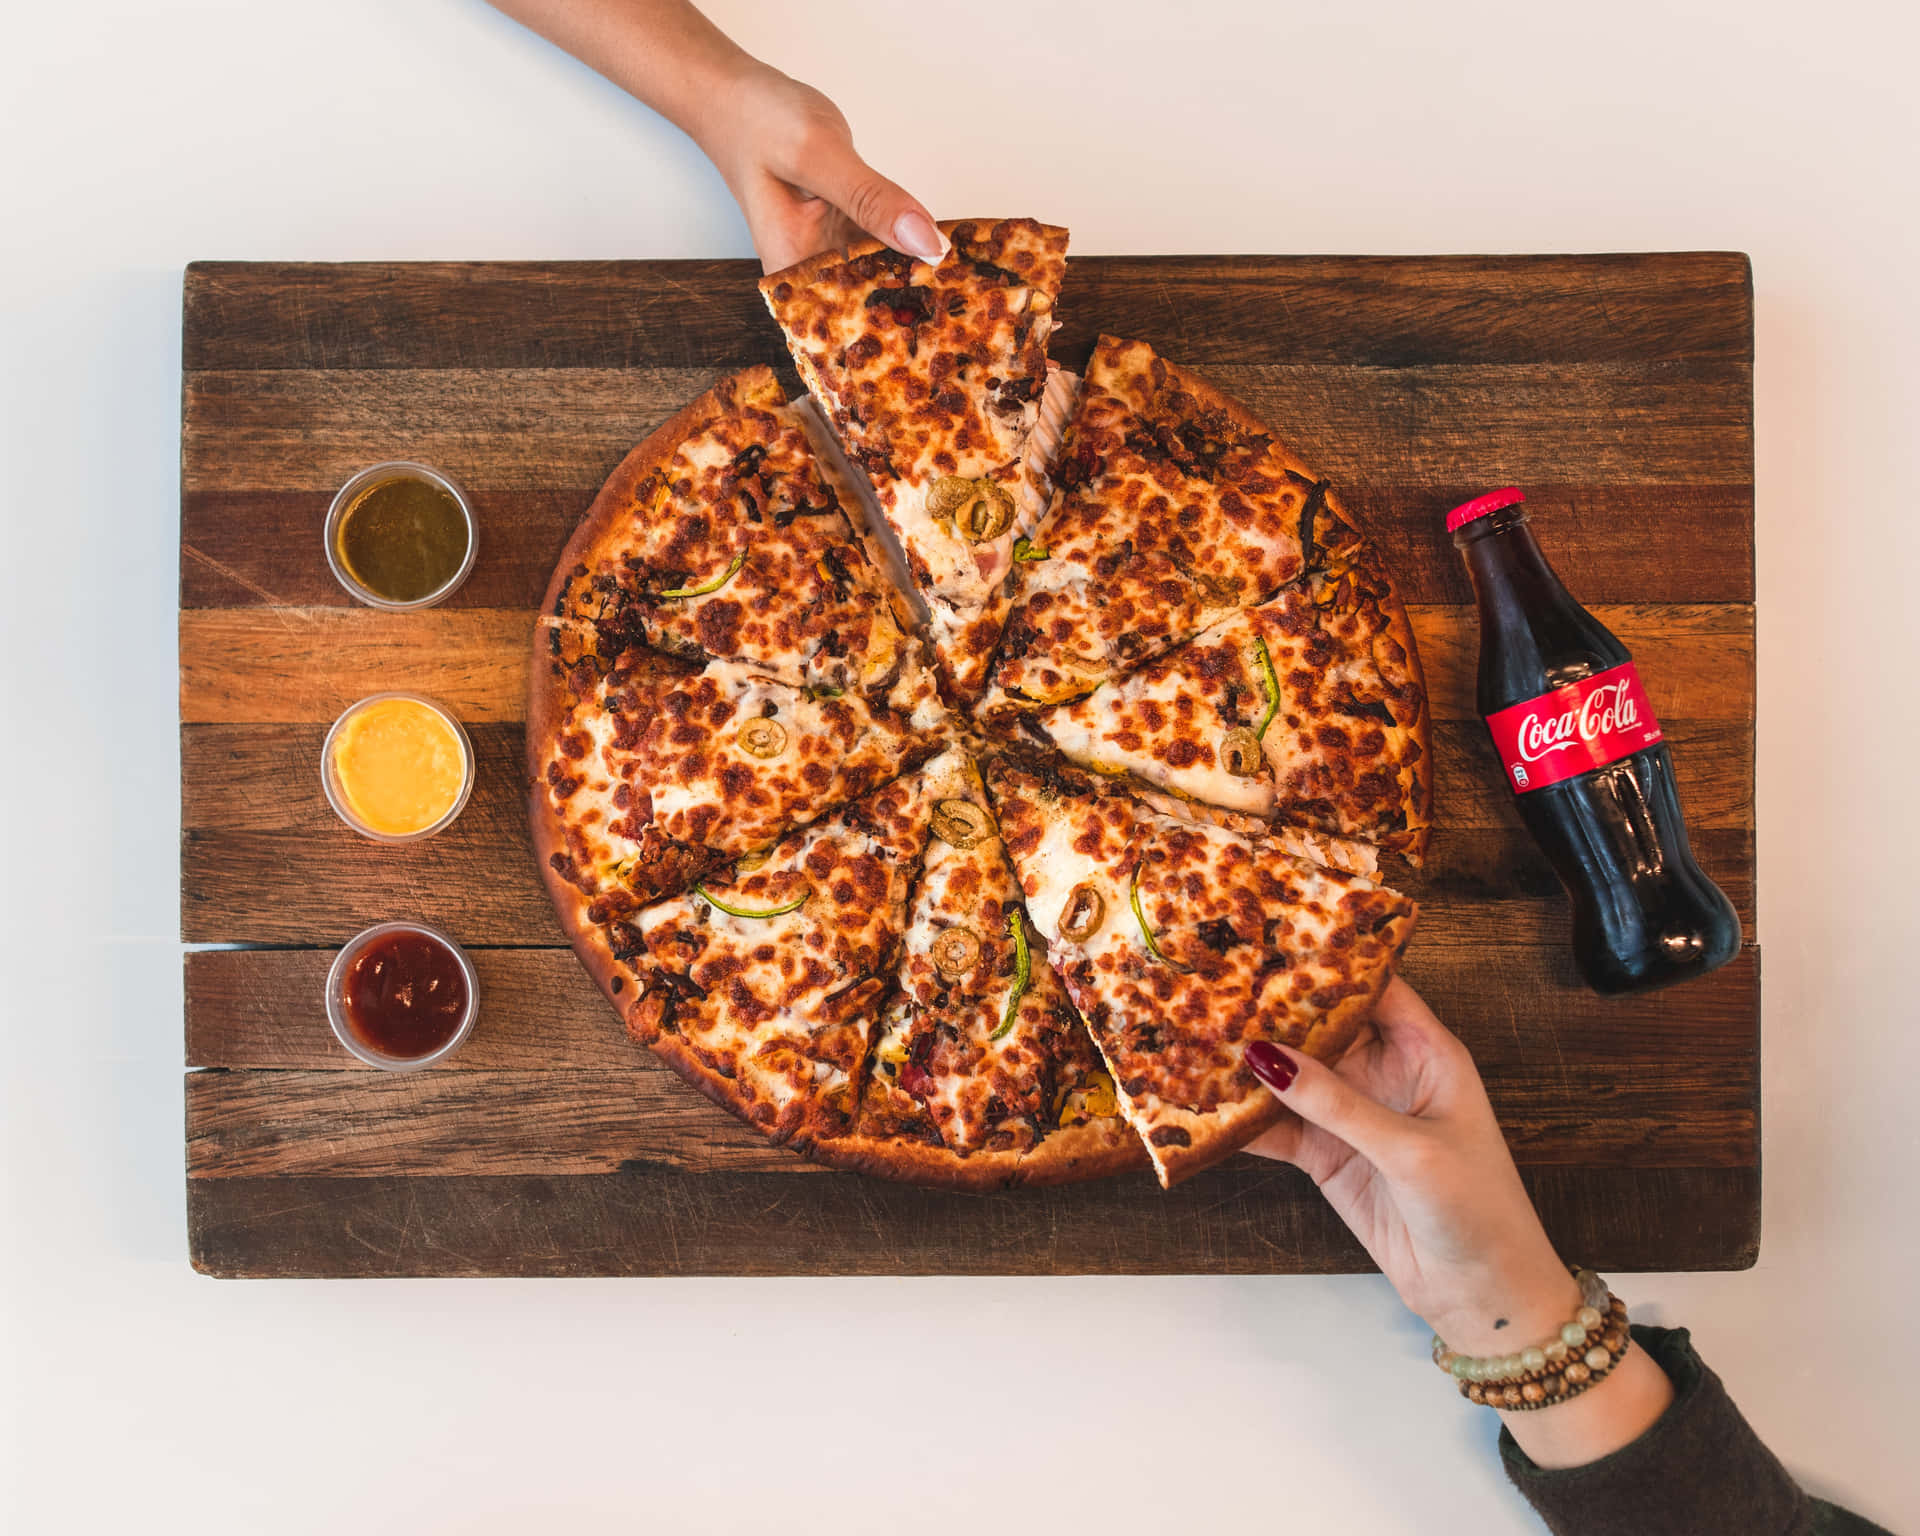 Enjoy a delicious pizza with friends at Pizza Hut!